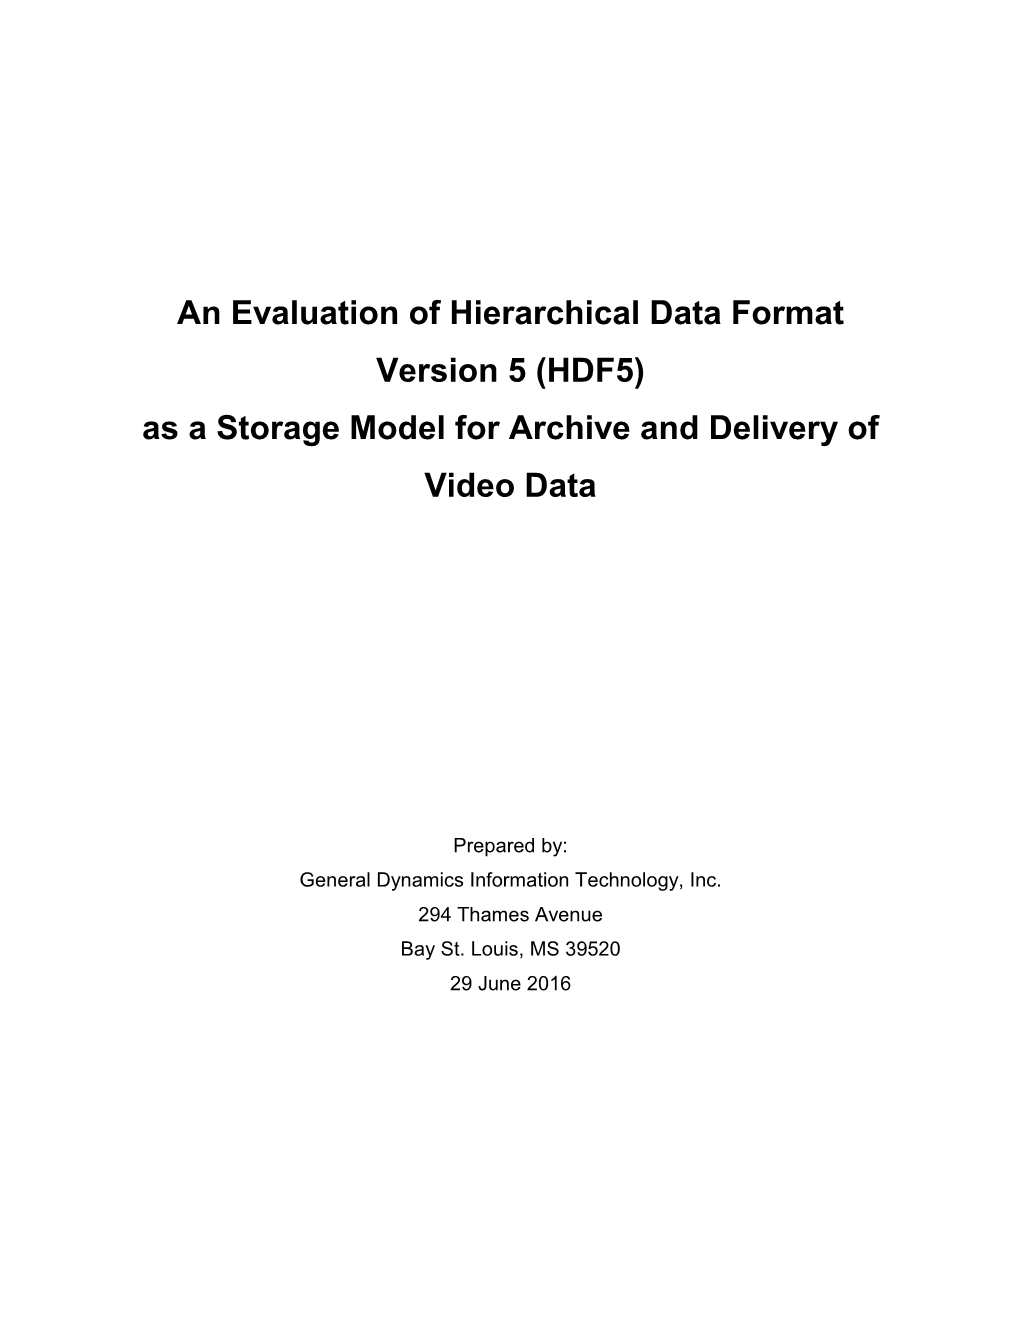 An Evaluation of Hierarchical Data Format Version 5 (HDF5) As a Storage Model for Archive and Delivery of Video Data